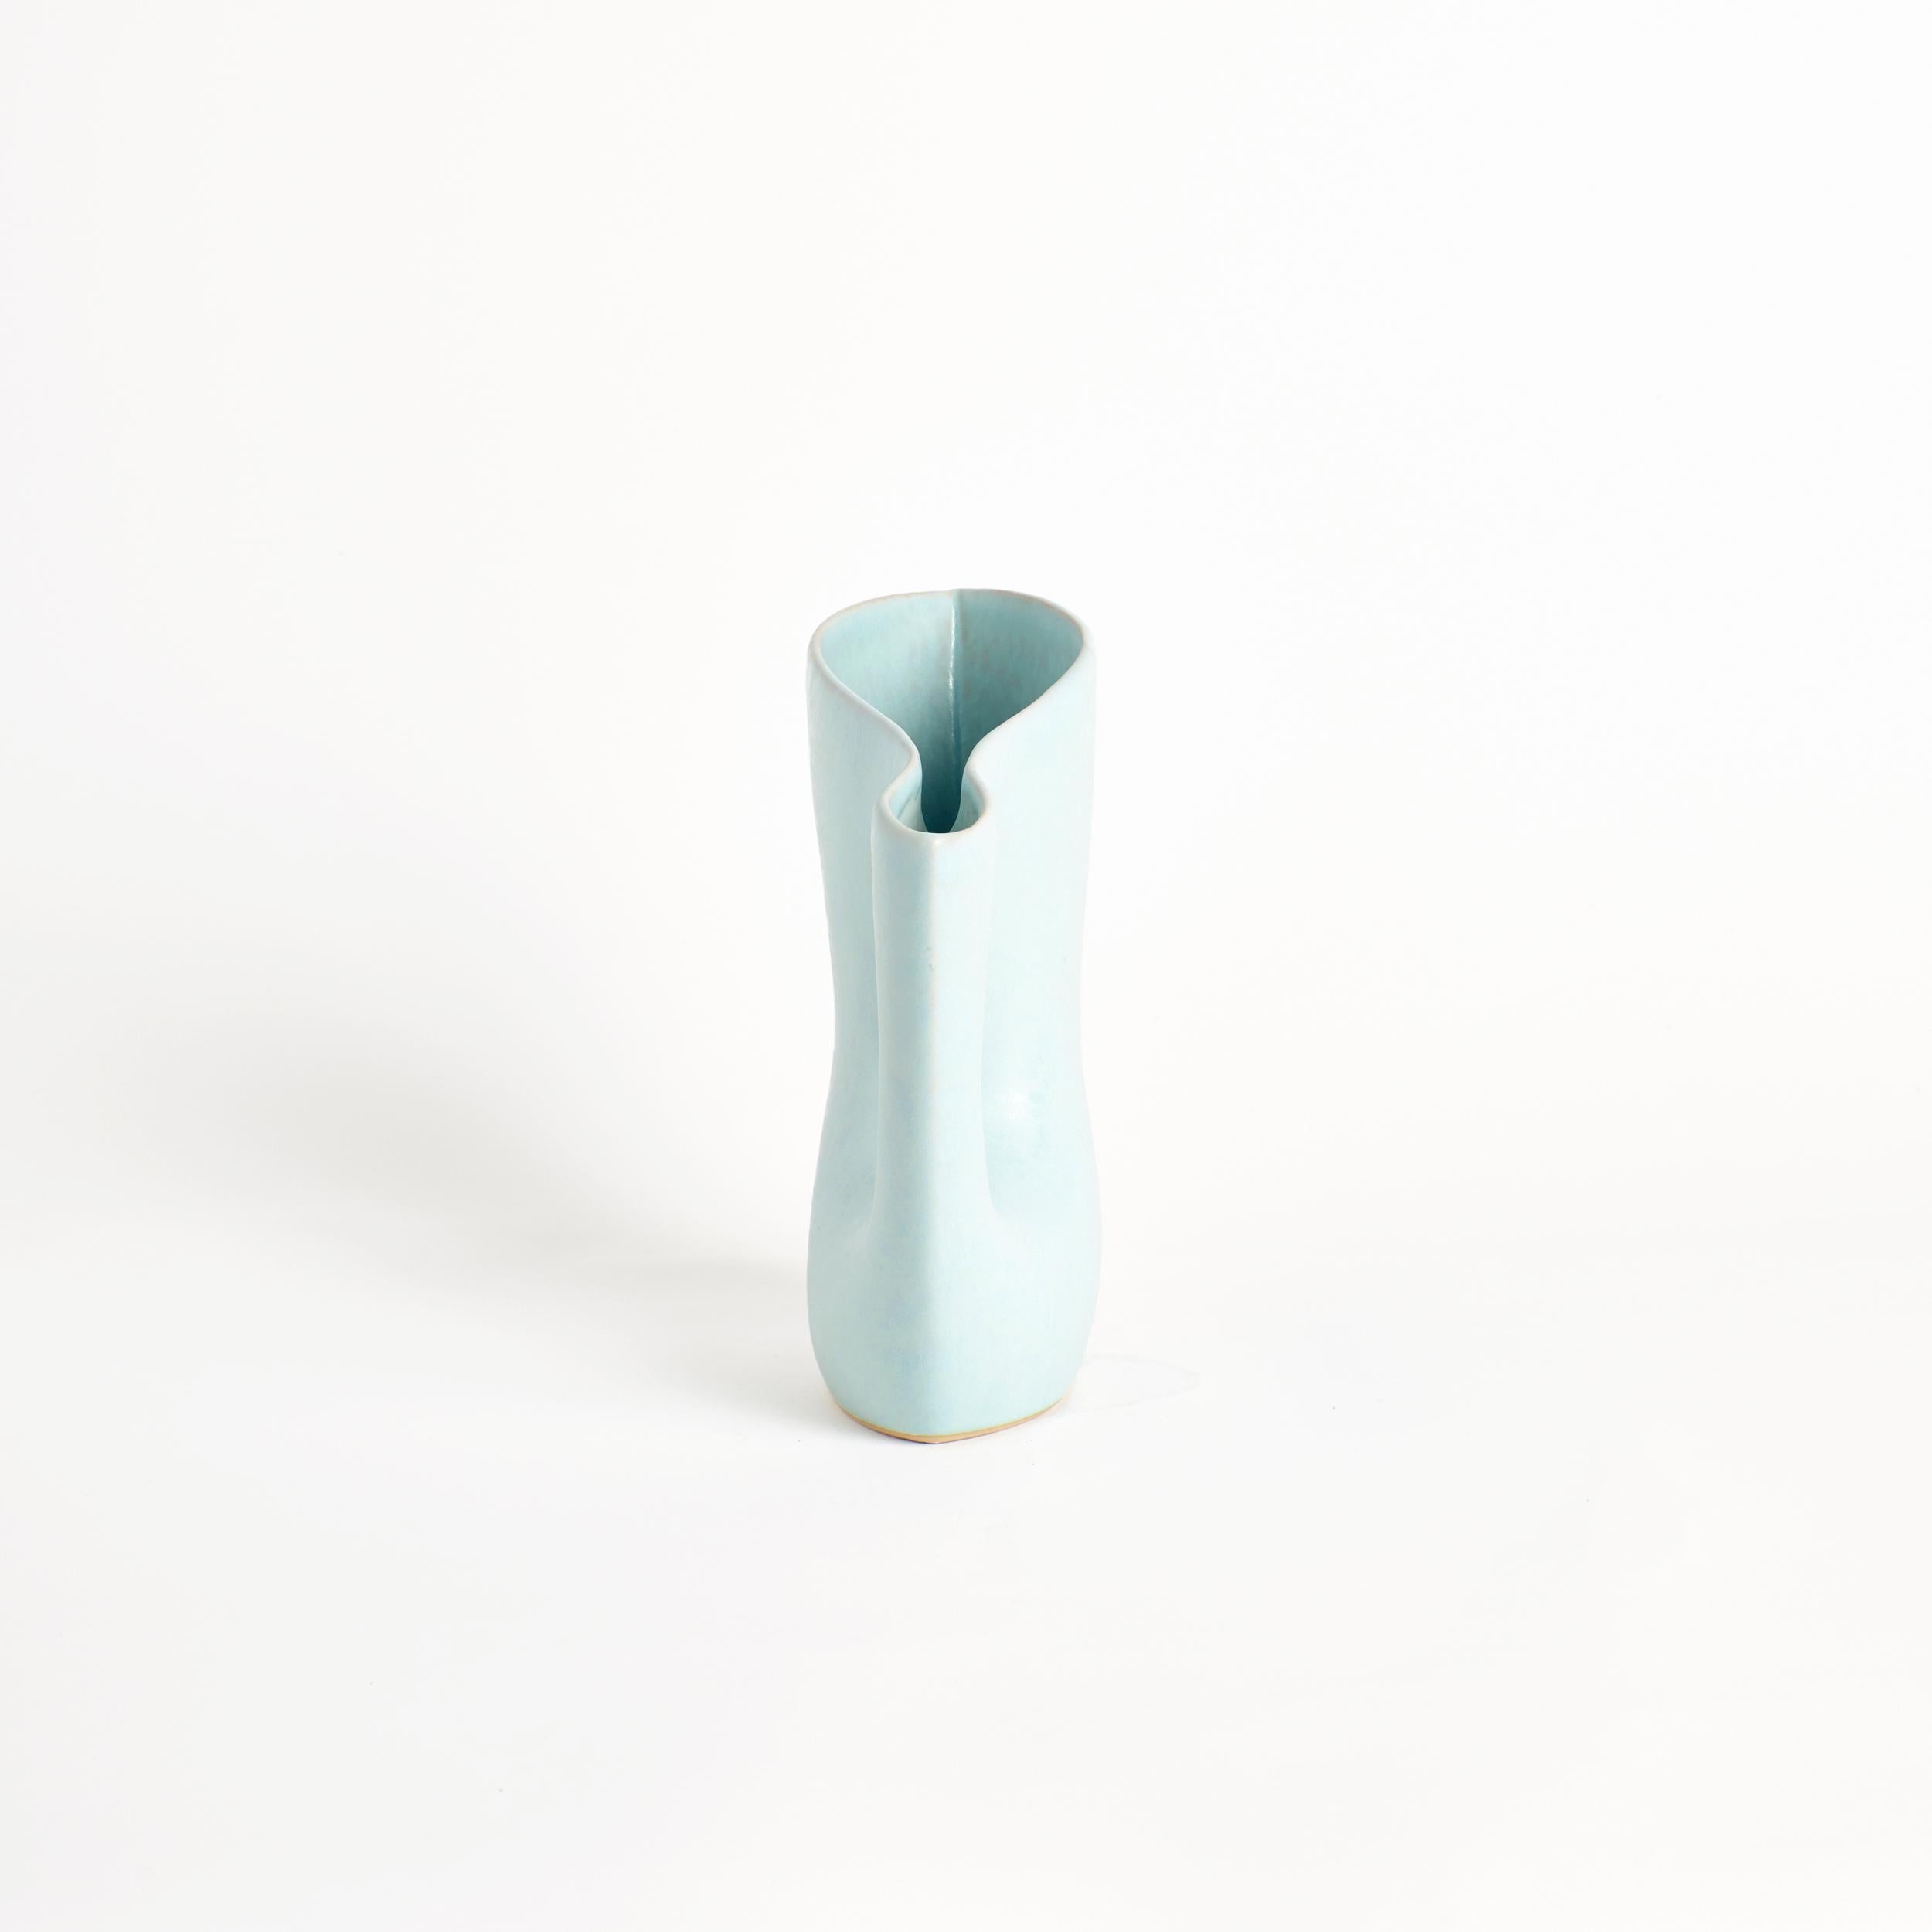 Mamasita Jug in Baby Blue
Designed by Project 213A in 2021
Handmade Stoneware
Waterproof


This elegantly sculpted jug features a continued opening and has taken inspiration from a collapsed vase. The piece is designed to enrich with design and